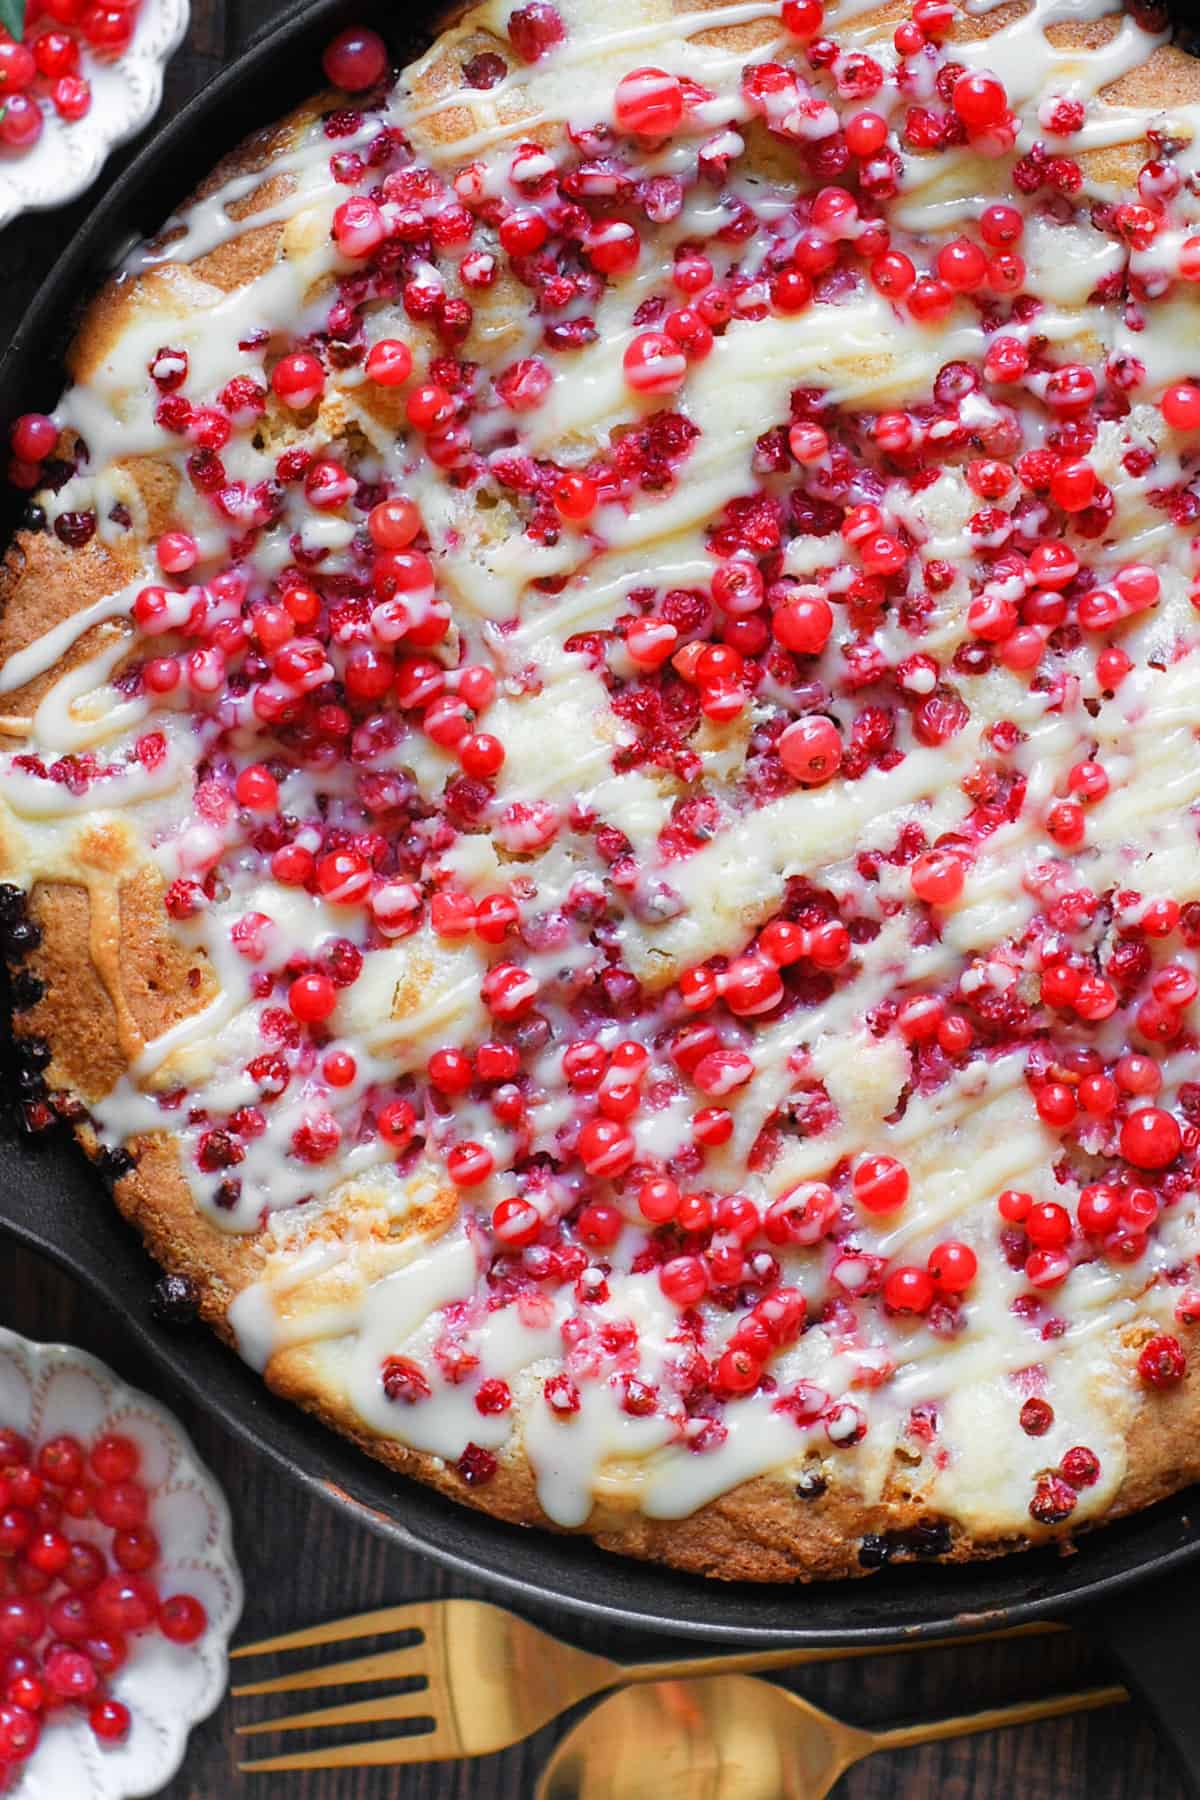 Red Currant Cake with the Cream Cheese Filling and with the Cream Cheese Topping drizzled on top - in a cast iron skillet.